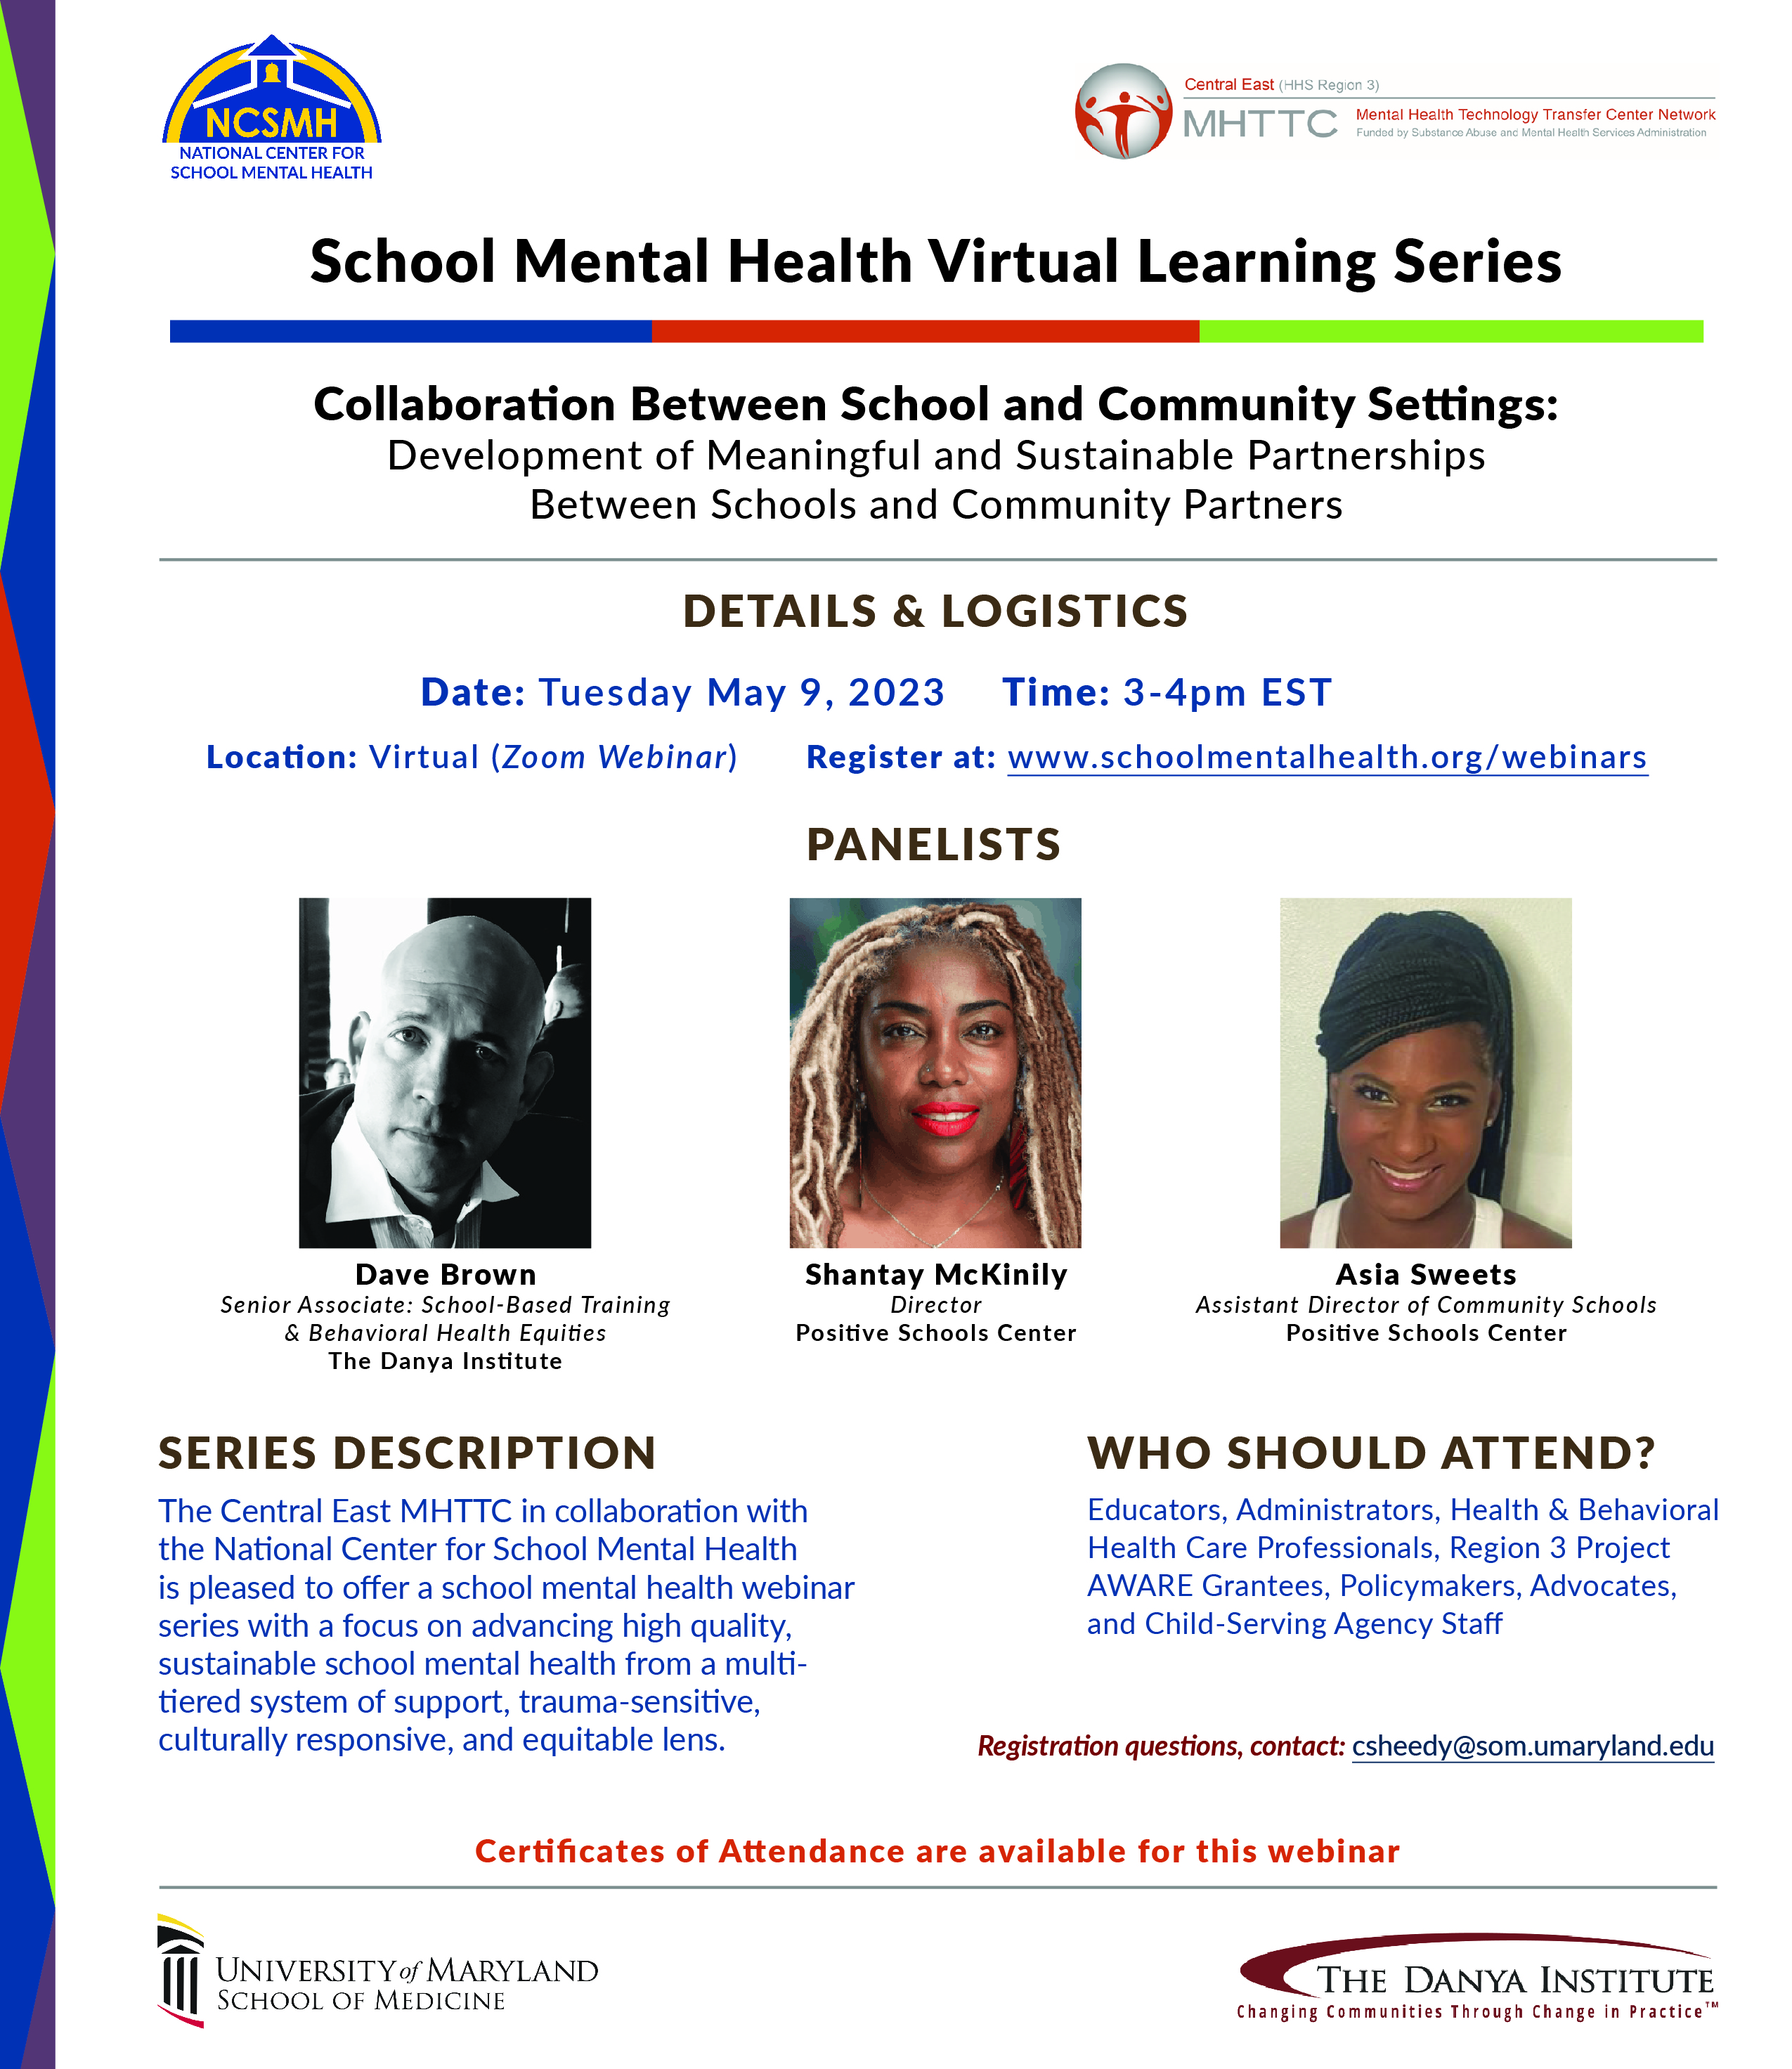 A flier for the School Mental Health Virtual Learning Series